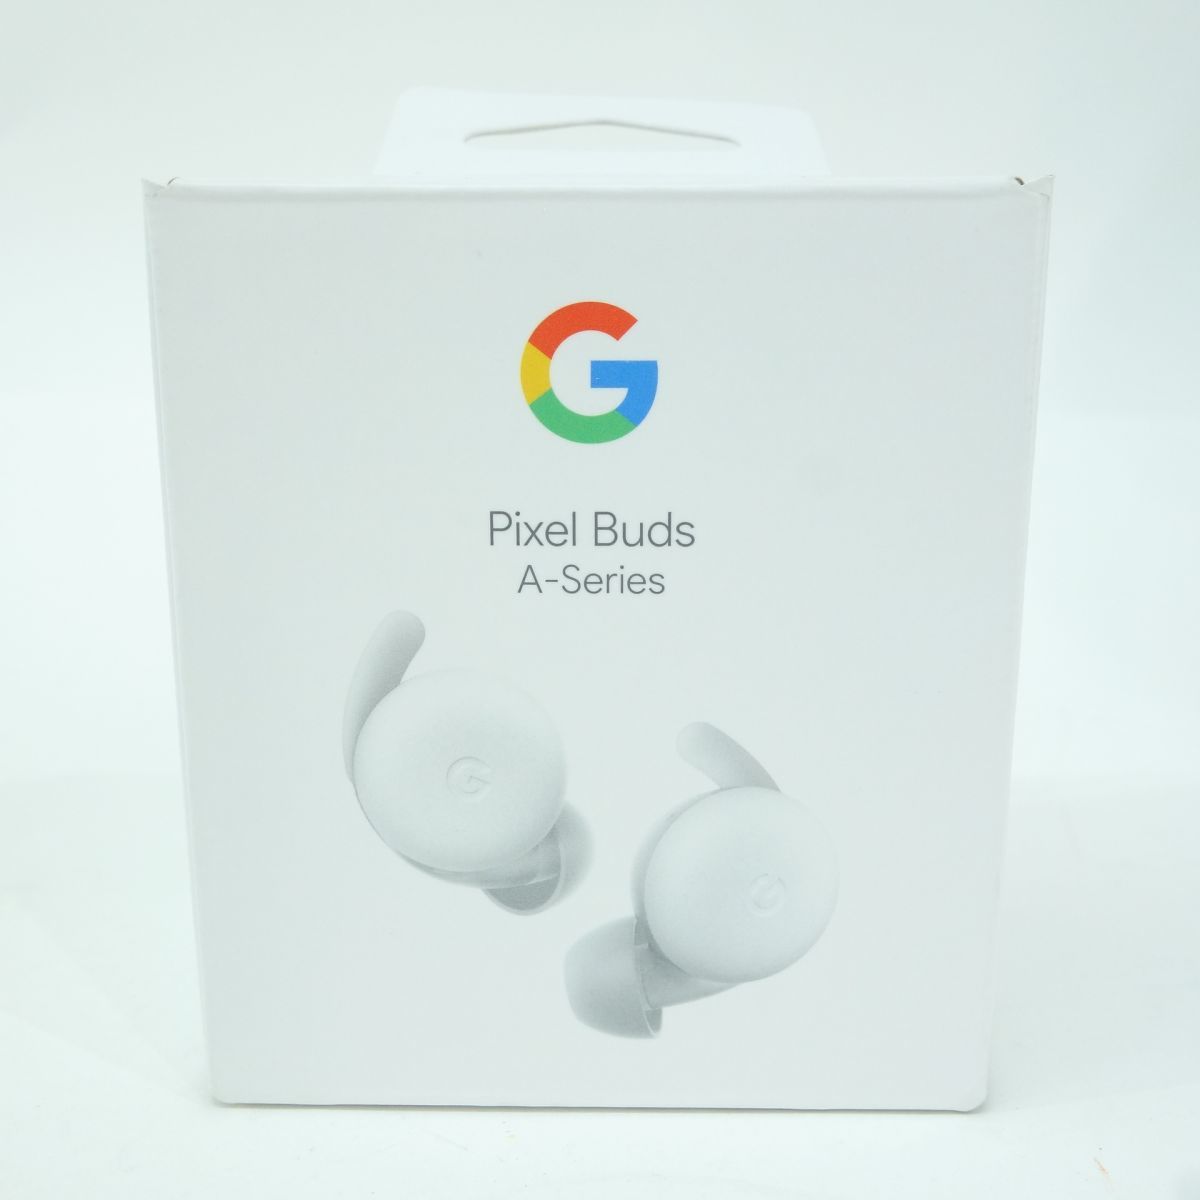 100 Google/グーグル pixel buds a-series Bluetoothイヤフォン Clearly White 完全ワイヤレスイヤホン ※中古